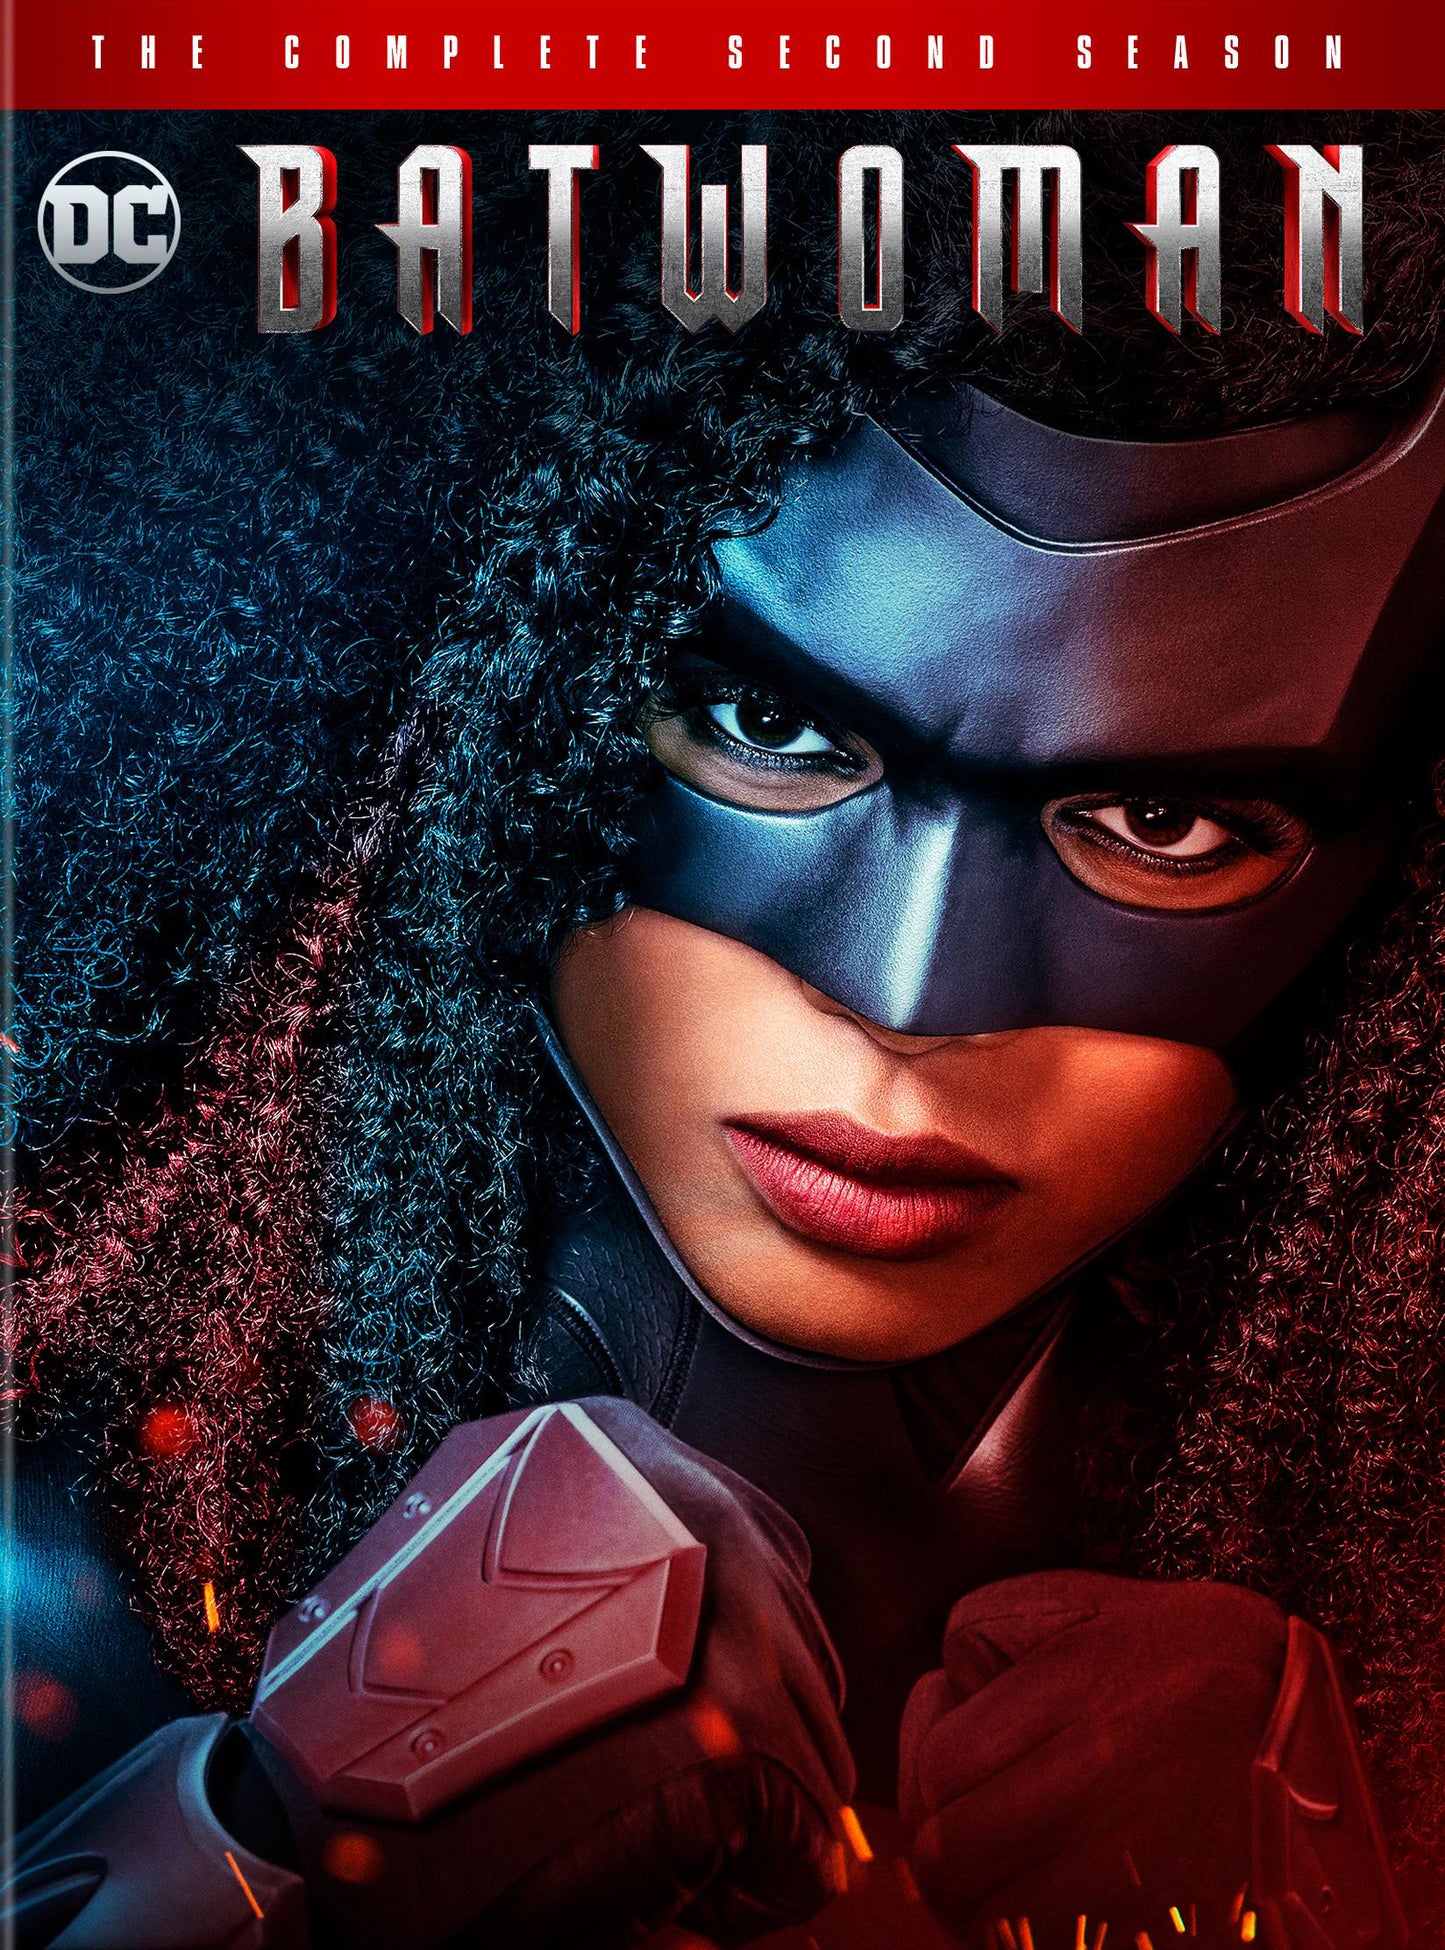 Batwoman: The Complete Second Season cover art